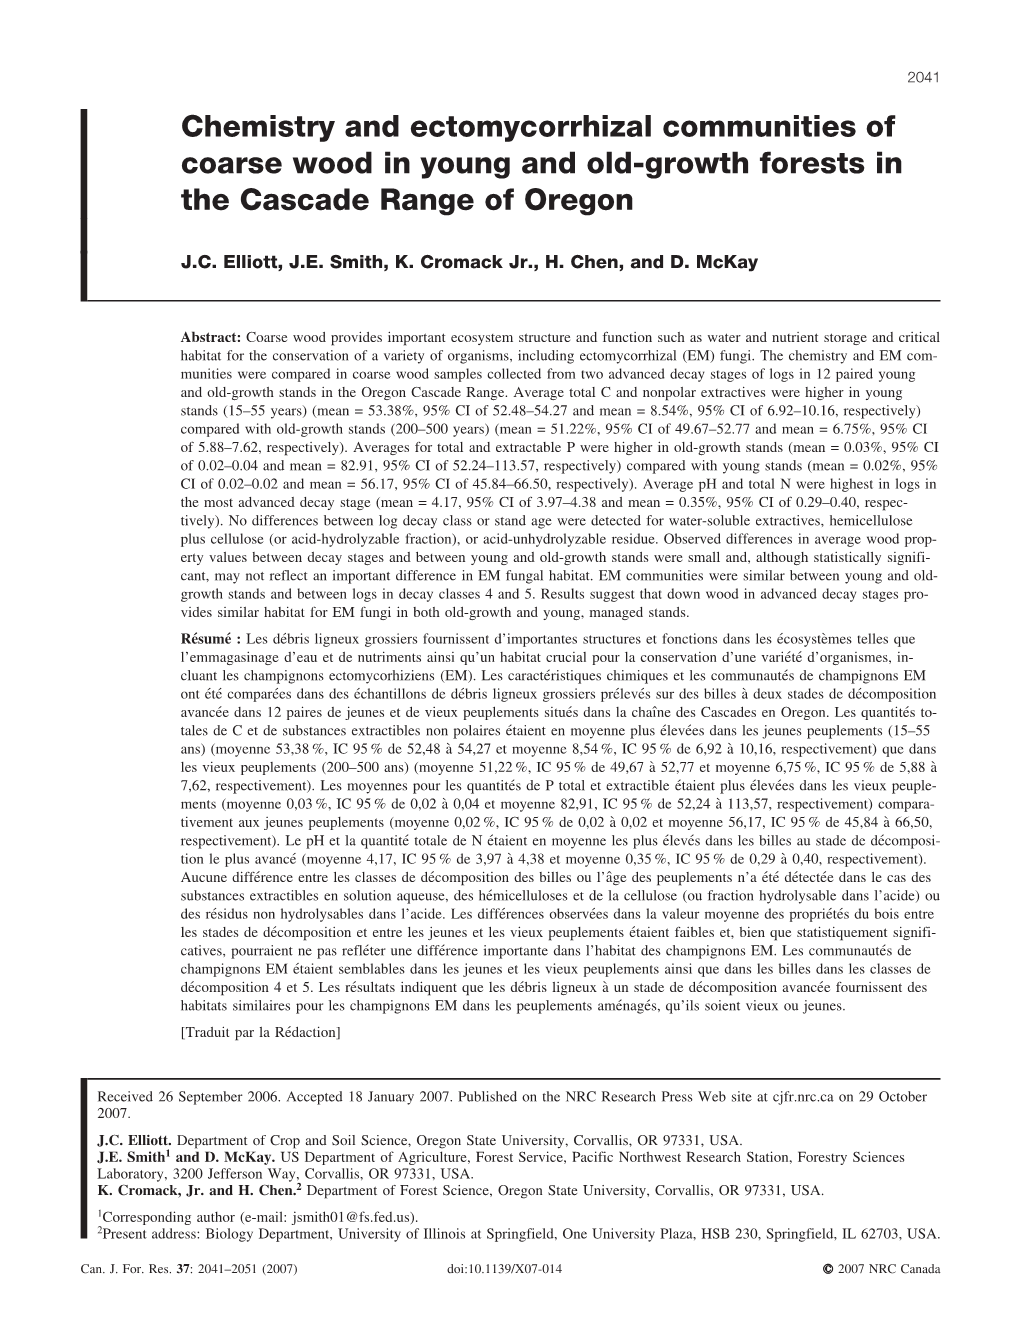 Chemistry and Ectomycorrhizal Communities of Coarse Wood in Young and Old-Growth Forests in the Cascade Range of Oregon